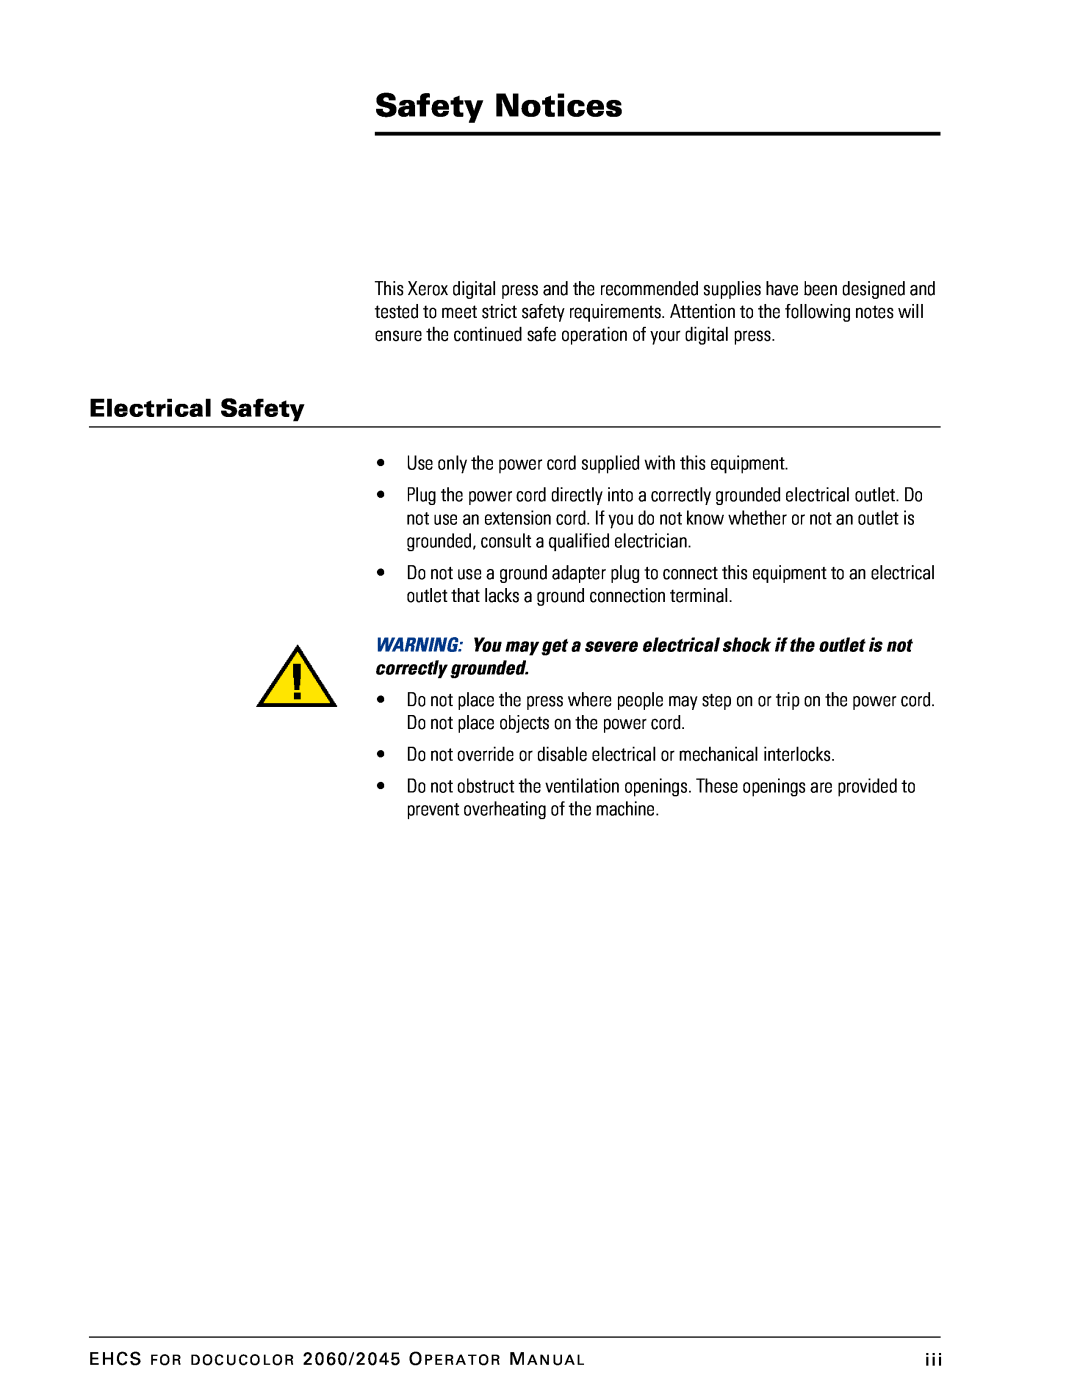 Xerox 2045 manual Safety Notices, Electrical Safety 